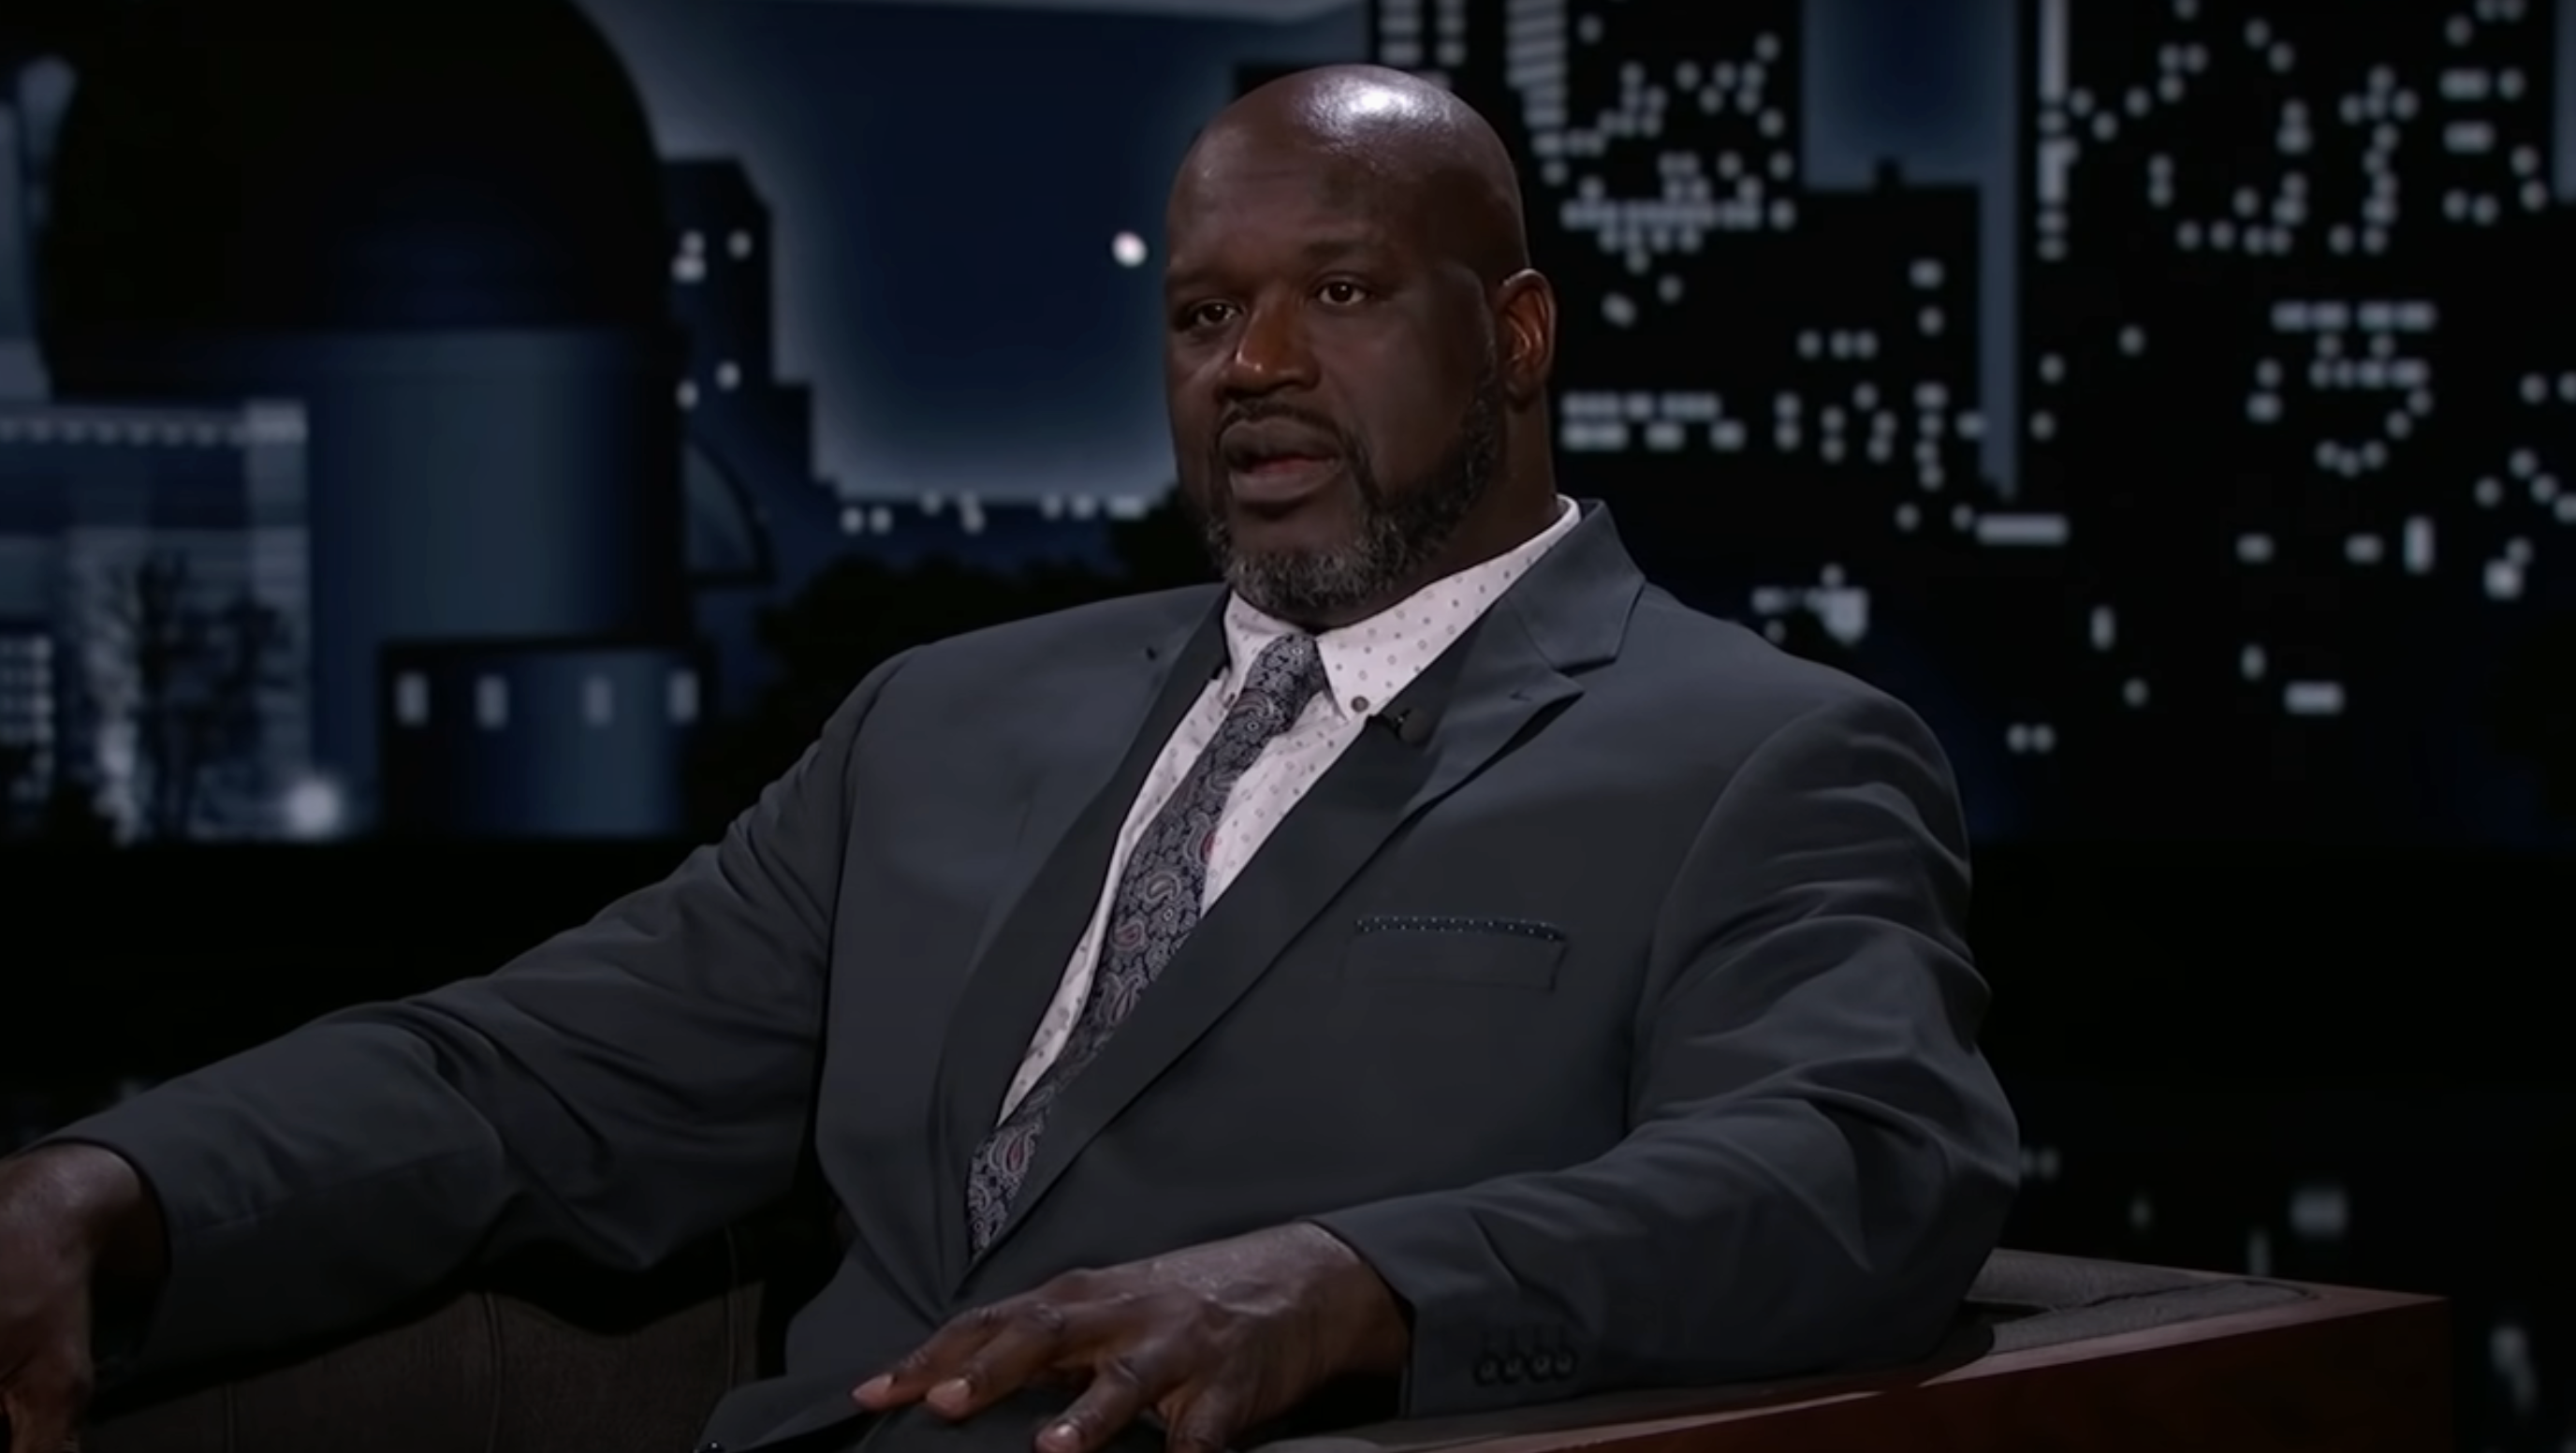 Shaquille O&#x27;Neal in a talk show setting, wearing a suit and patterned tie